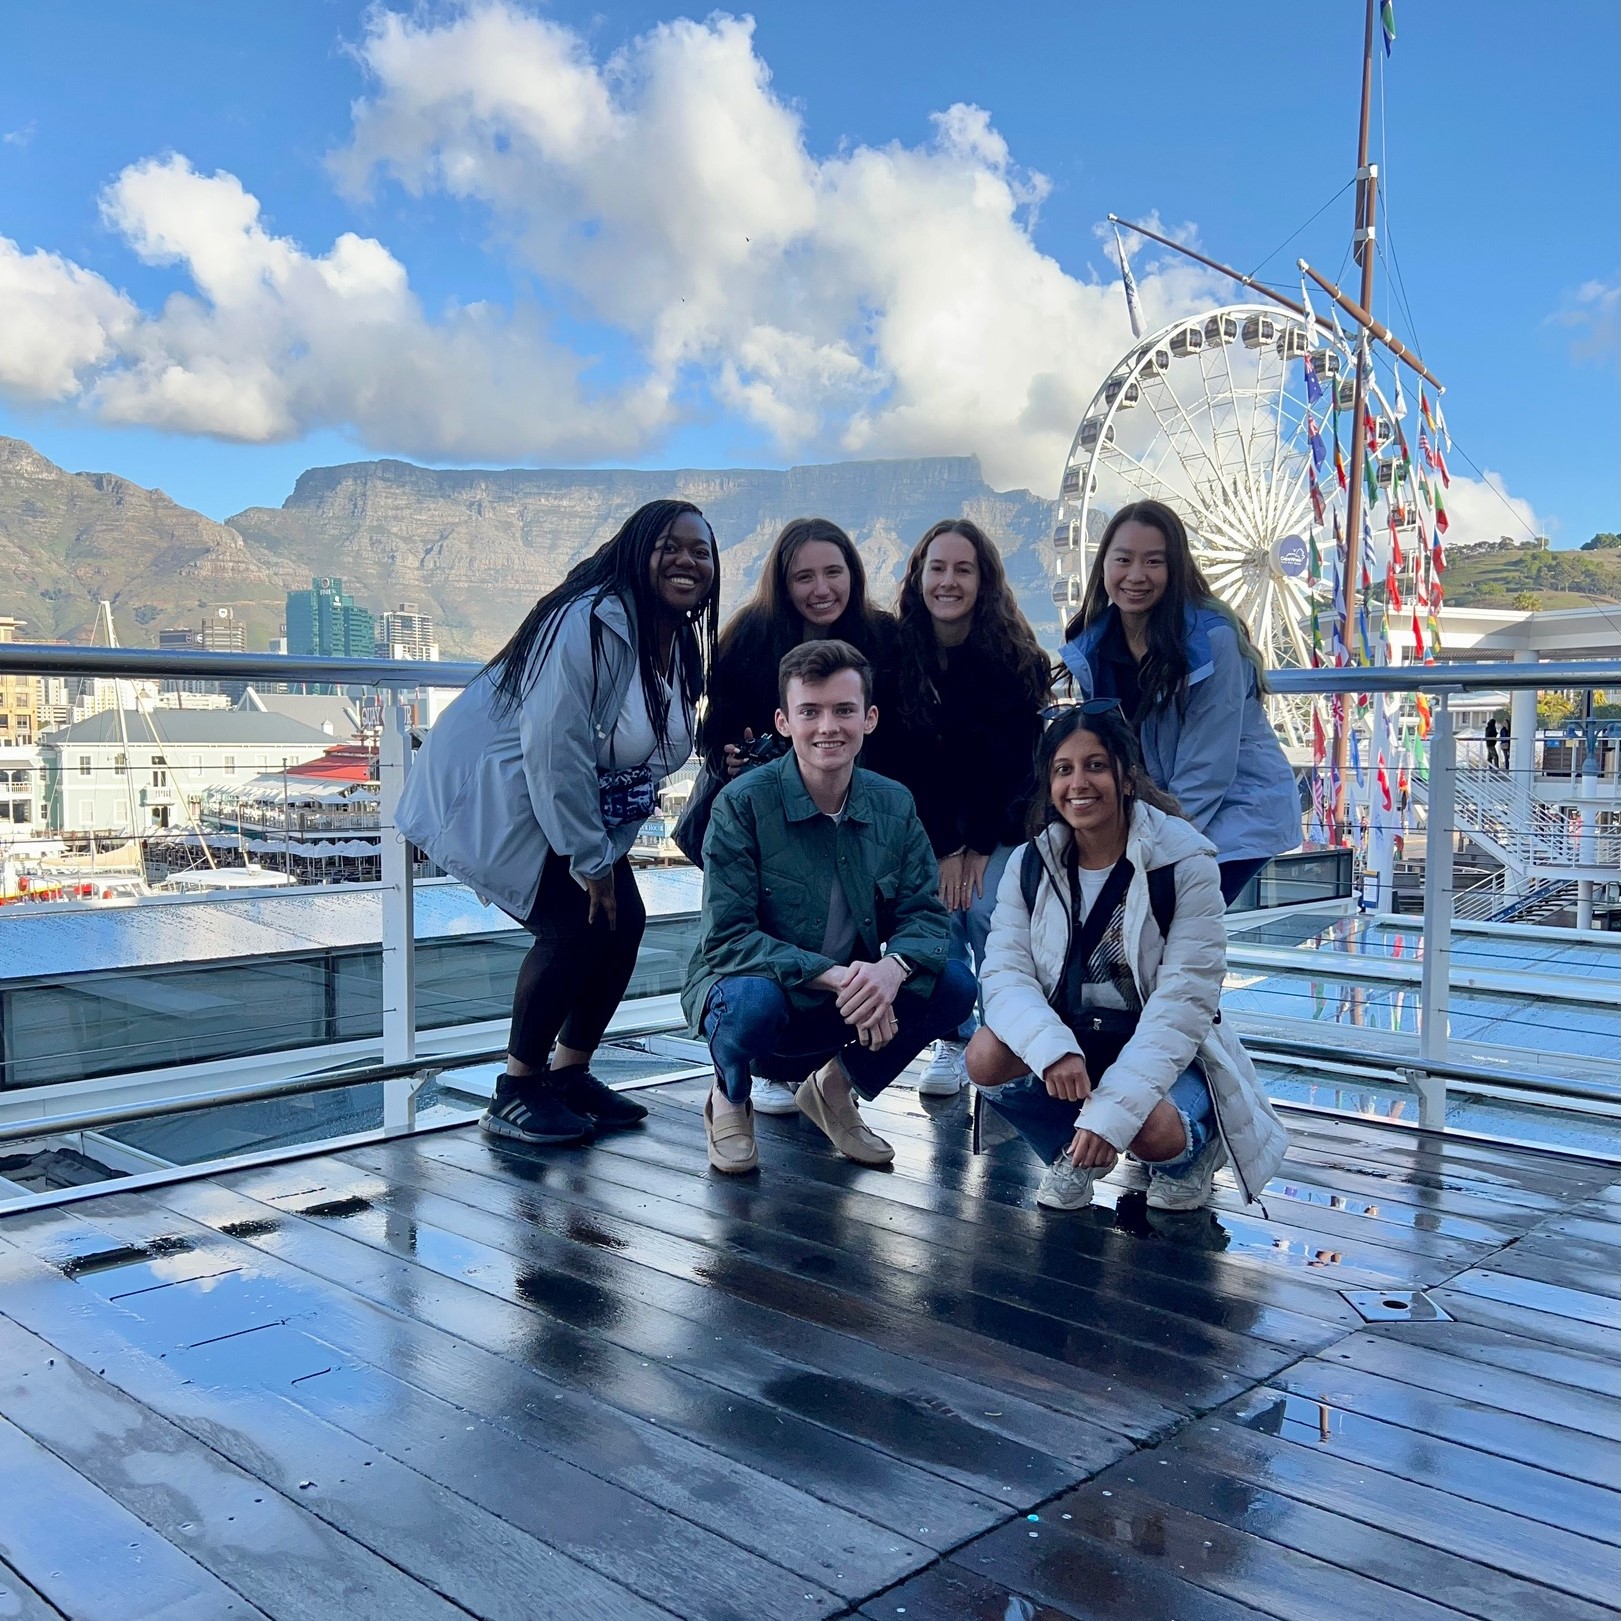 students posing for a picture on a pier. in the background, there is a Ferris wheel and mountains.